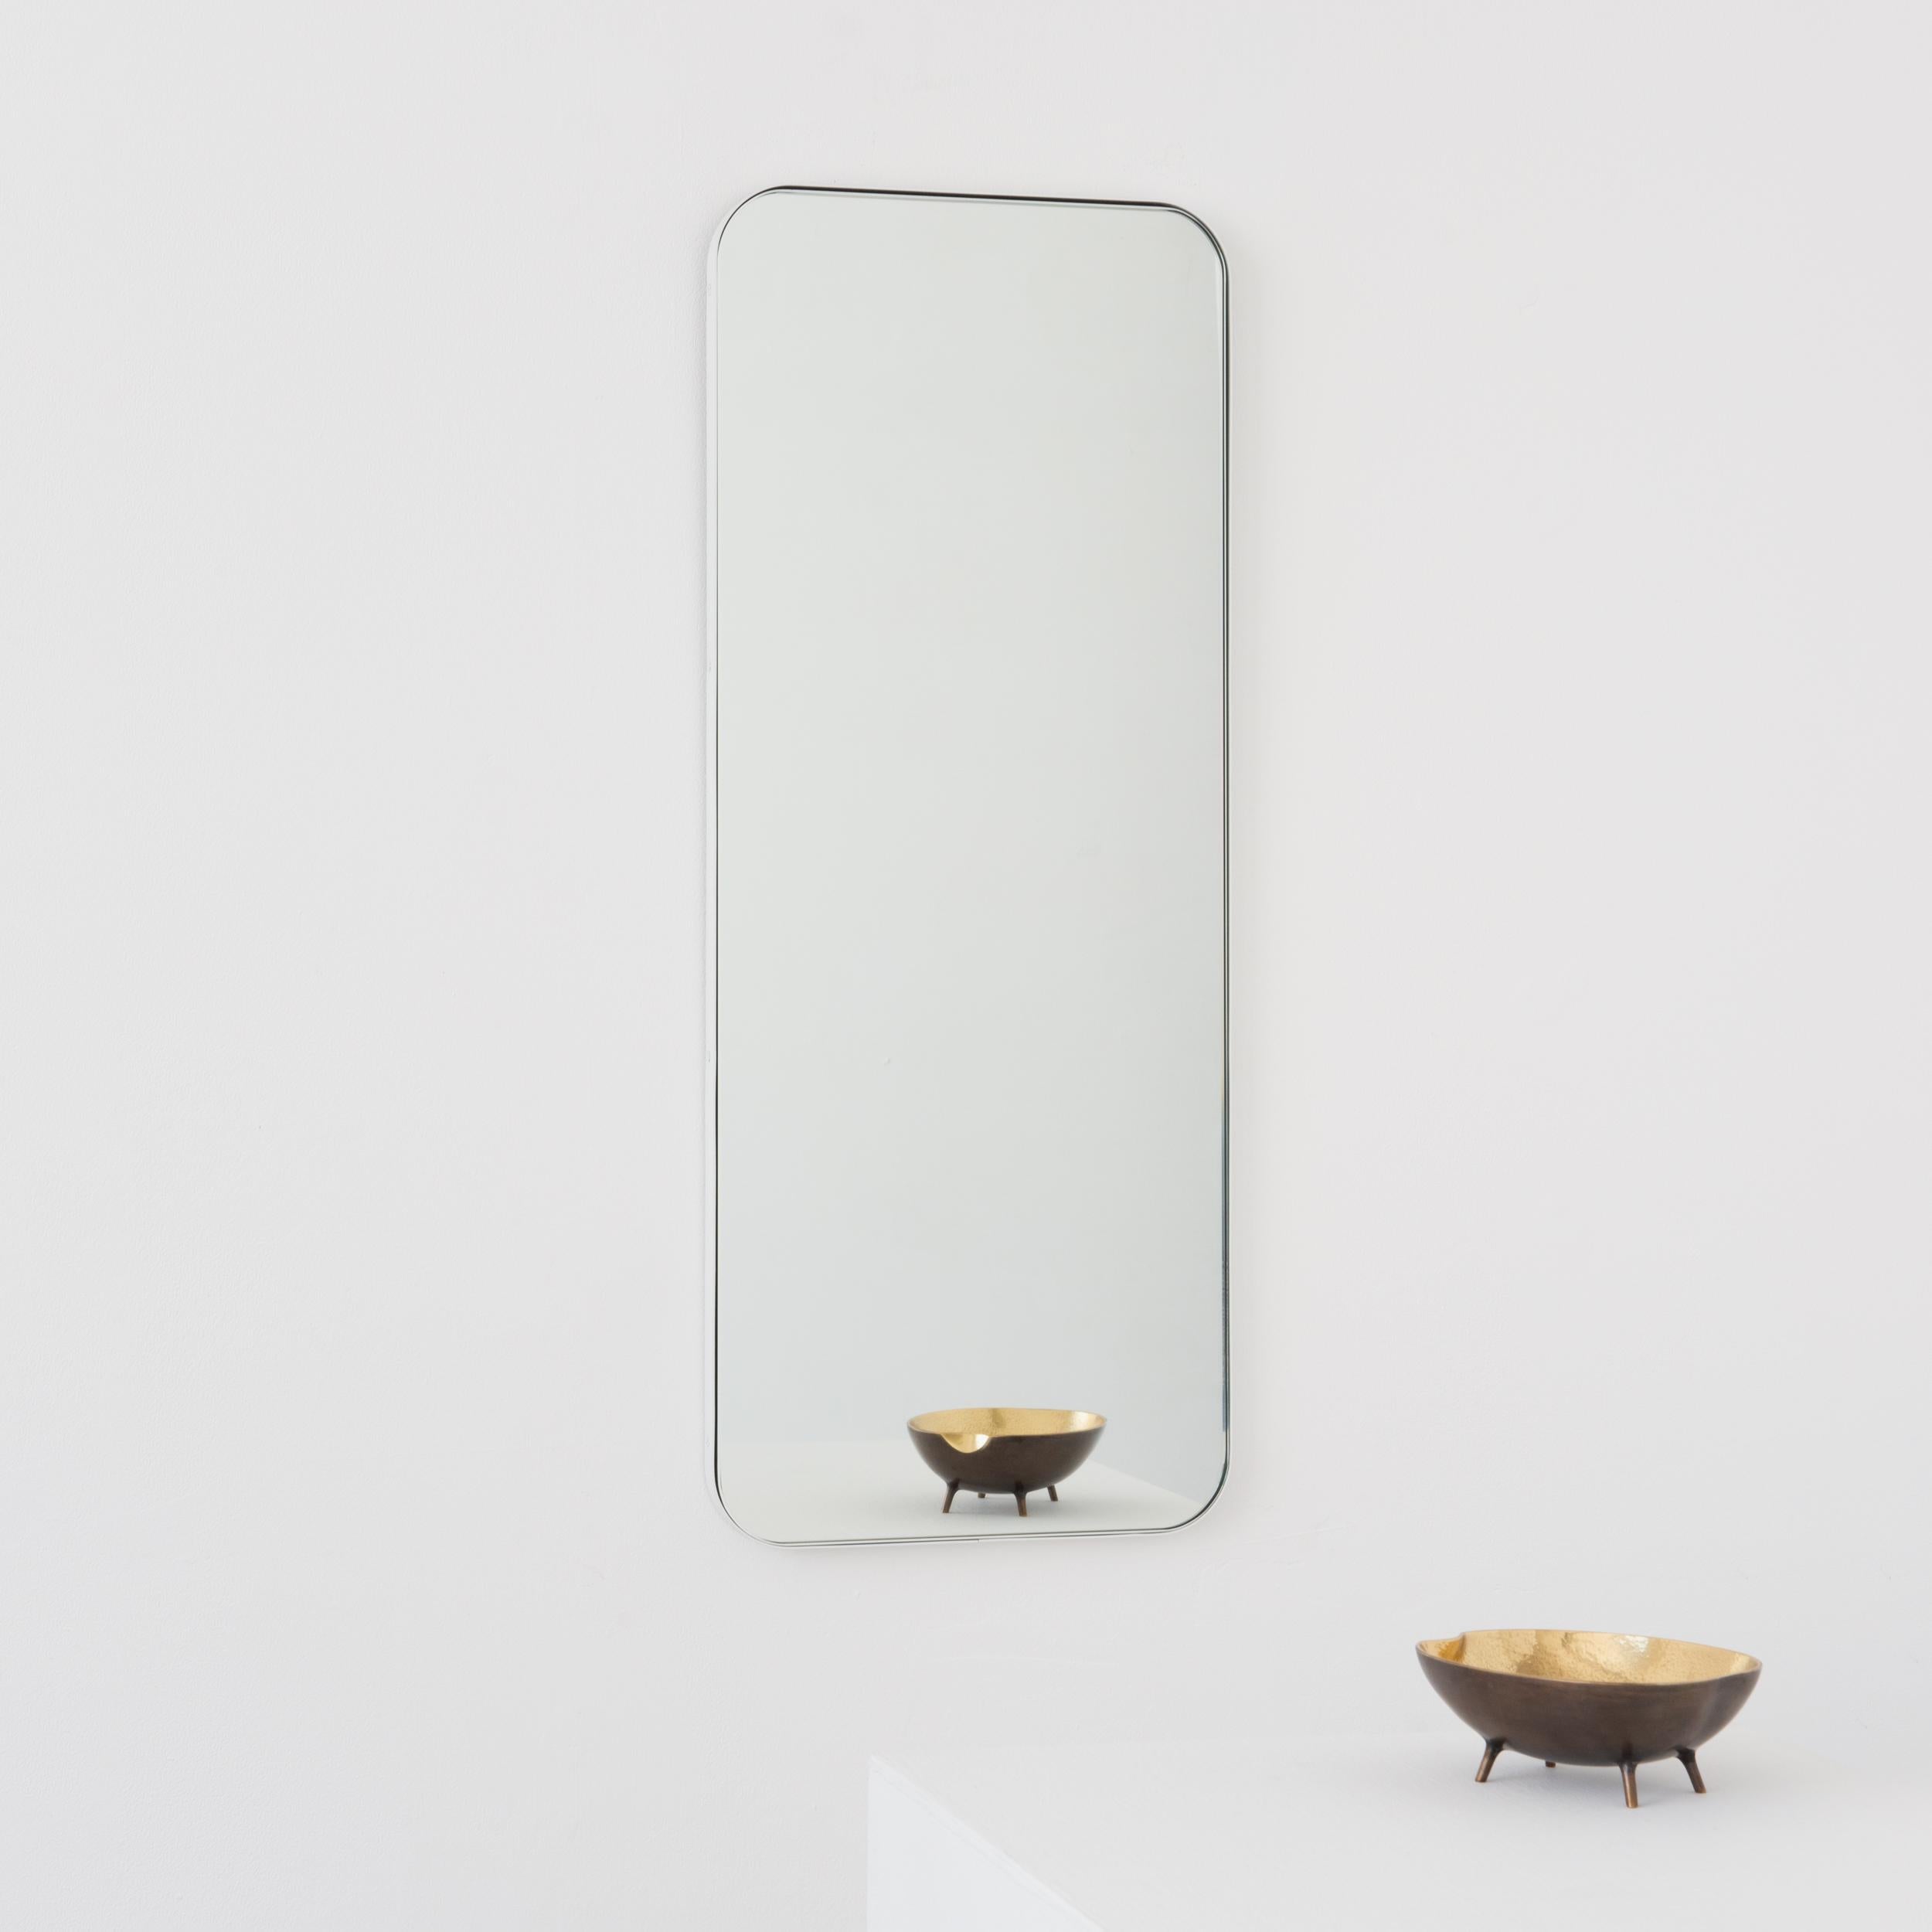 Quadris Rectangular Minimalist Wall Mirror with a White Frame, Medium In New Condition For Sale In London, GB